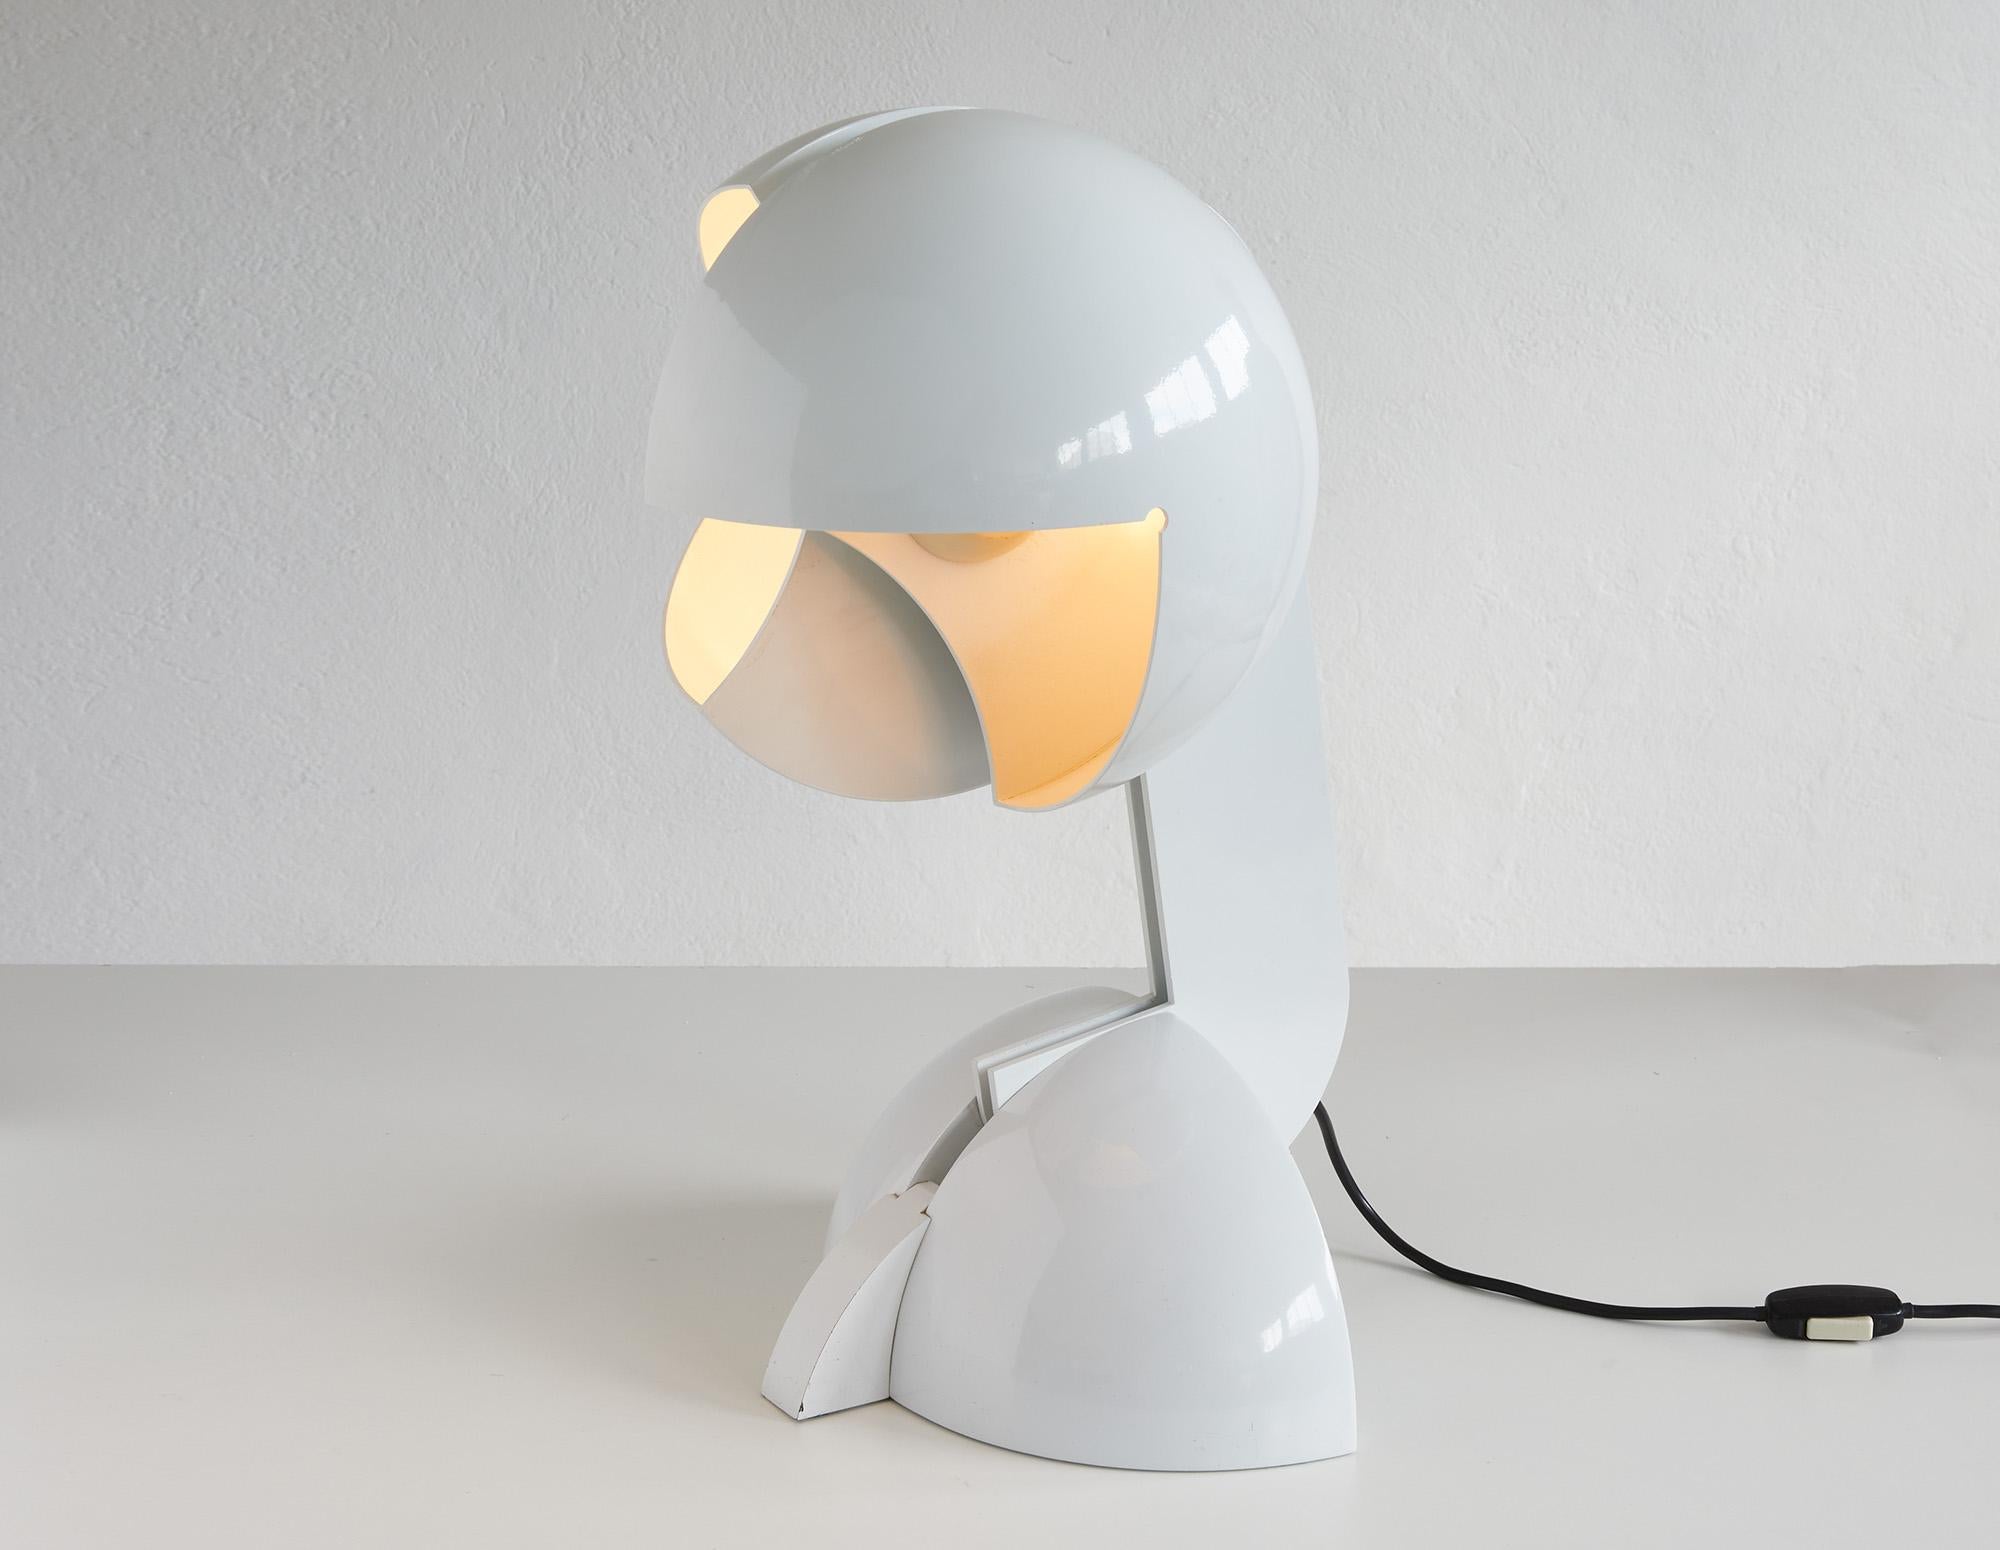 Vintage and all original Ruspa table lamp by Gae Aulenti in white enameled metal and cast iron designed for Martinelli Luce in 1968.

The lamp features a central movable arm that can be put in different positions. The individually shaped two